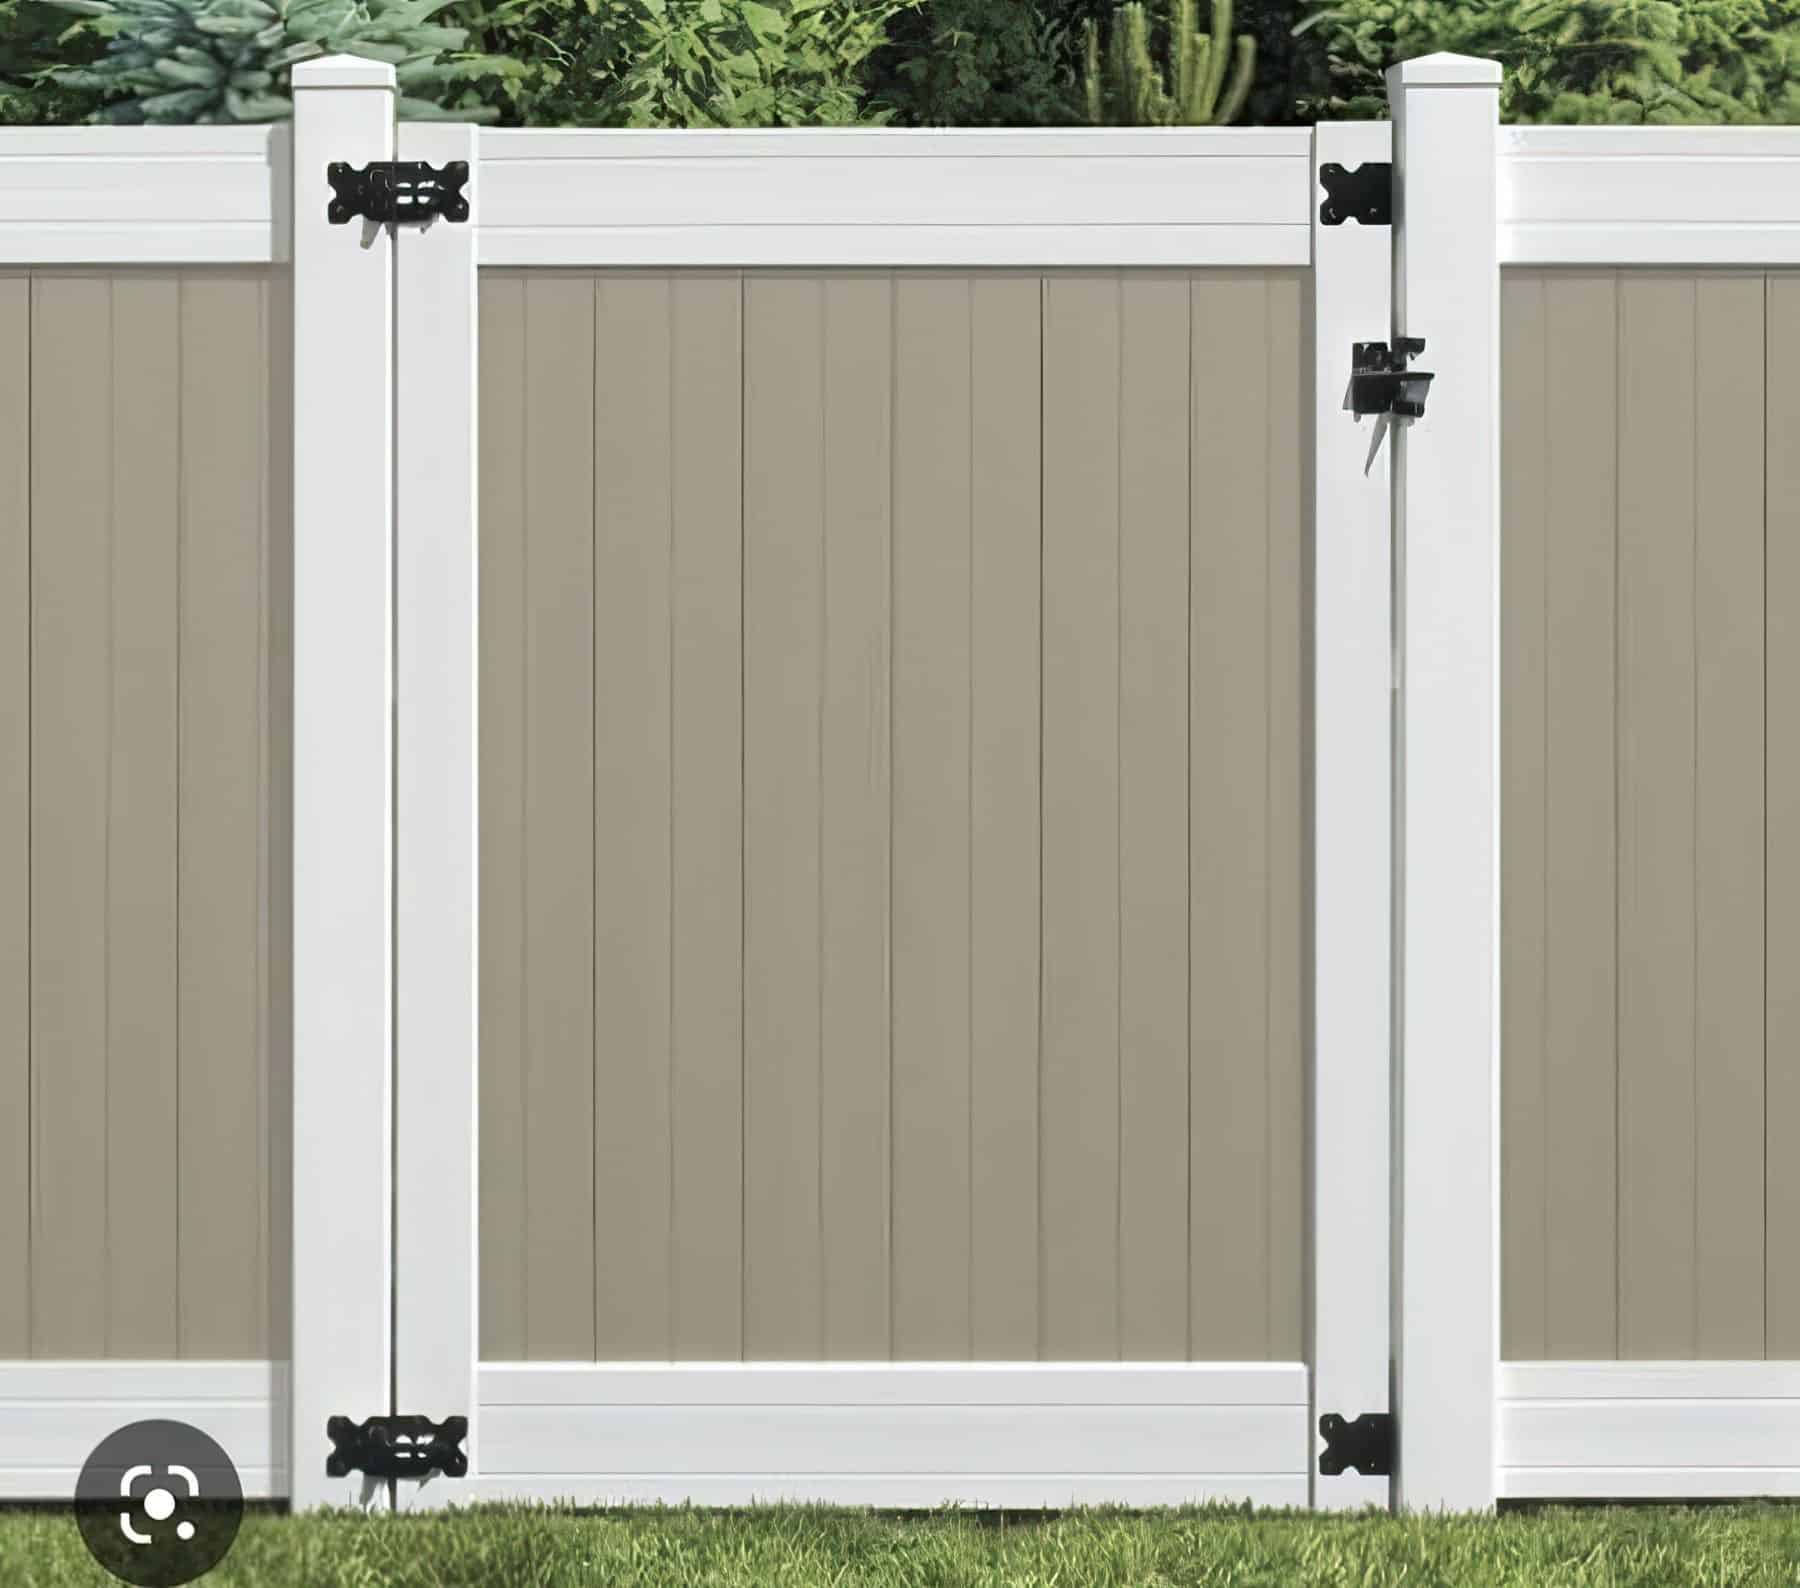 A beige vinyl single side gate featuring a matte white border with contrasting black hinges next to the grassy backyard.